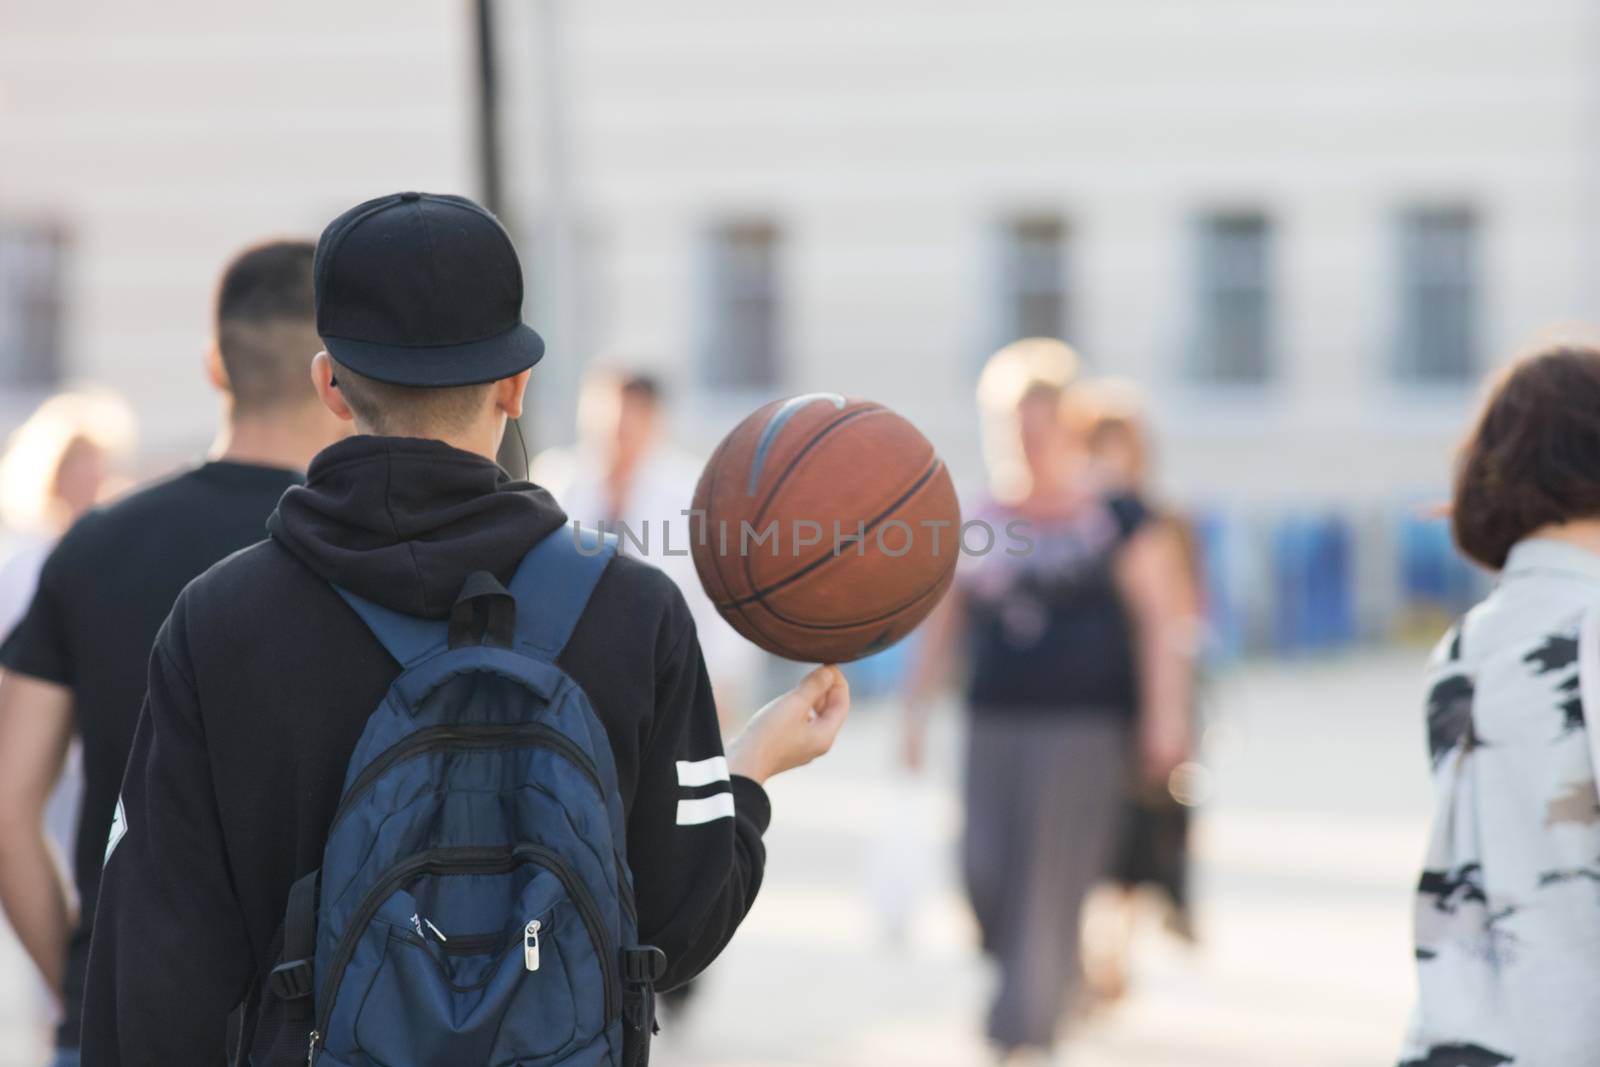 Young basketball player walking down the street with the ball, photo of the back